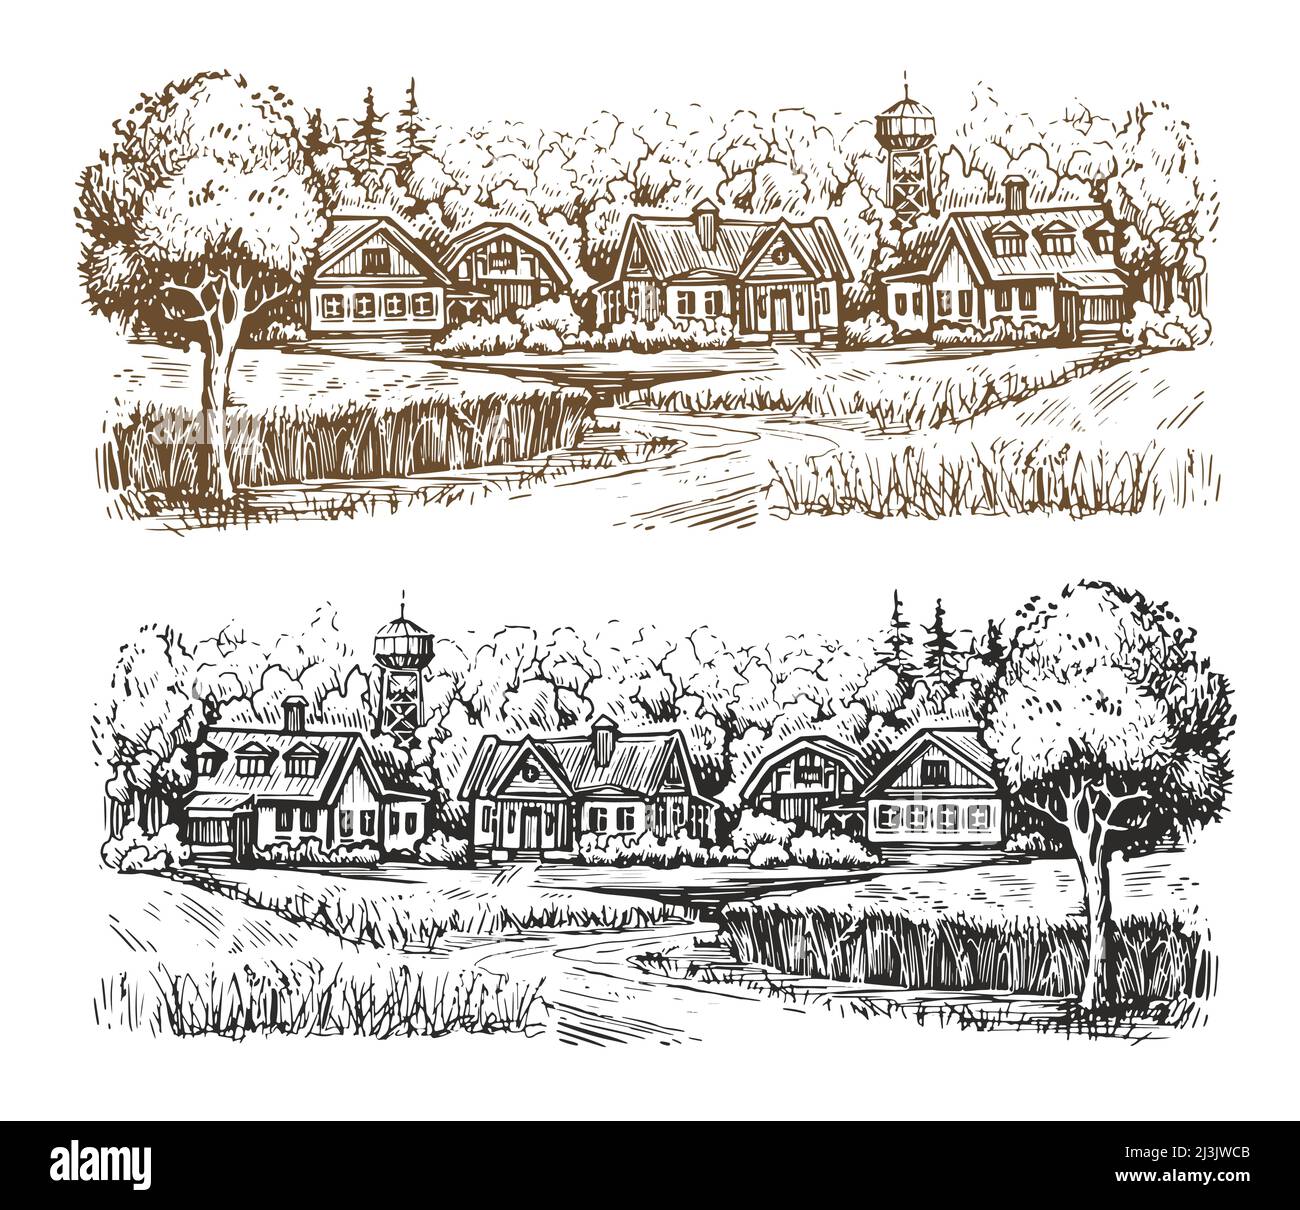 How To Draw A Beautiful Village House Scenery Drawing | House drawing | House  drawing colour - YouTube | House drawing, Scenery, Village drawing